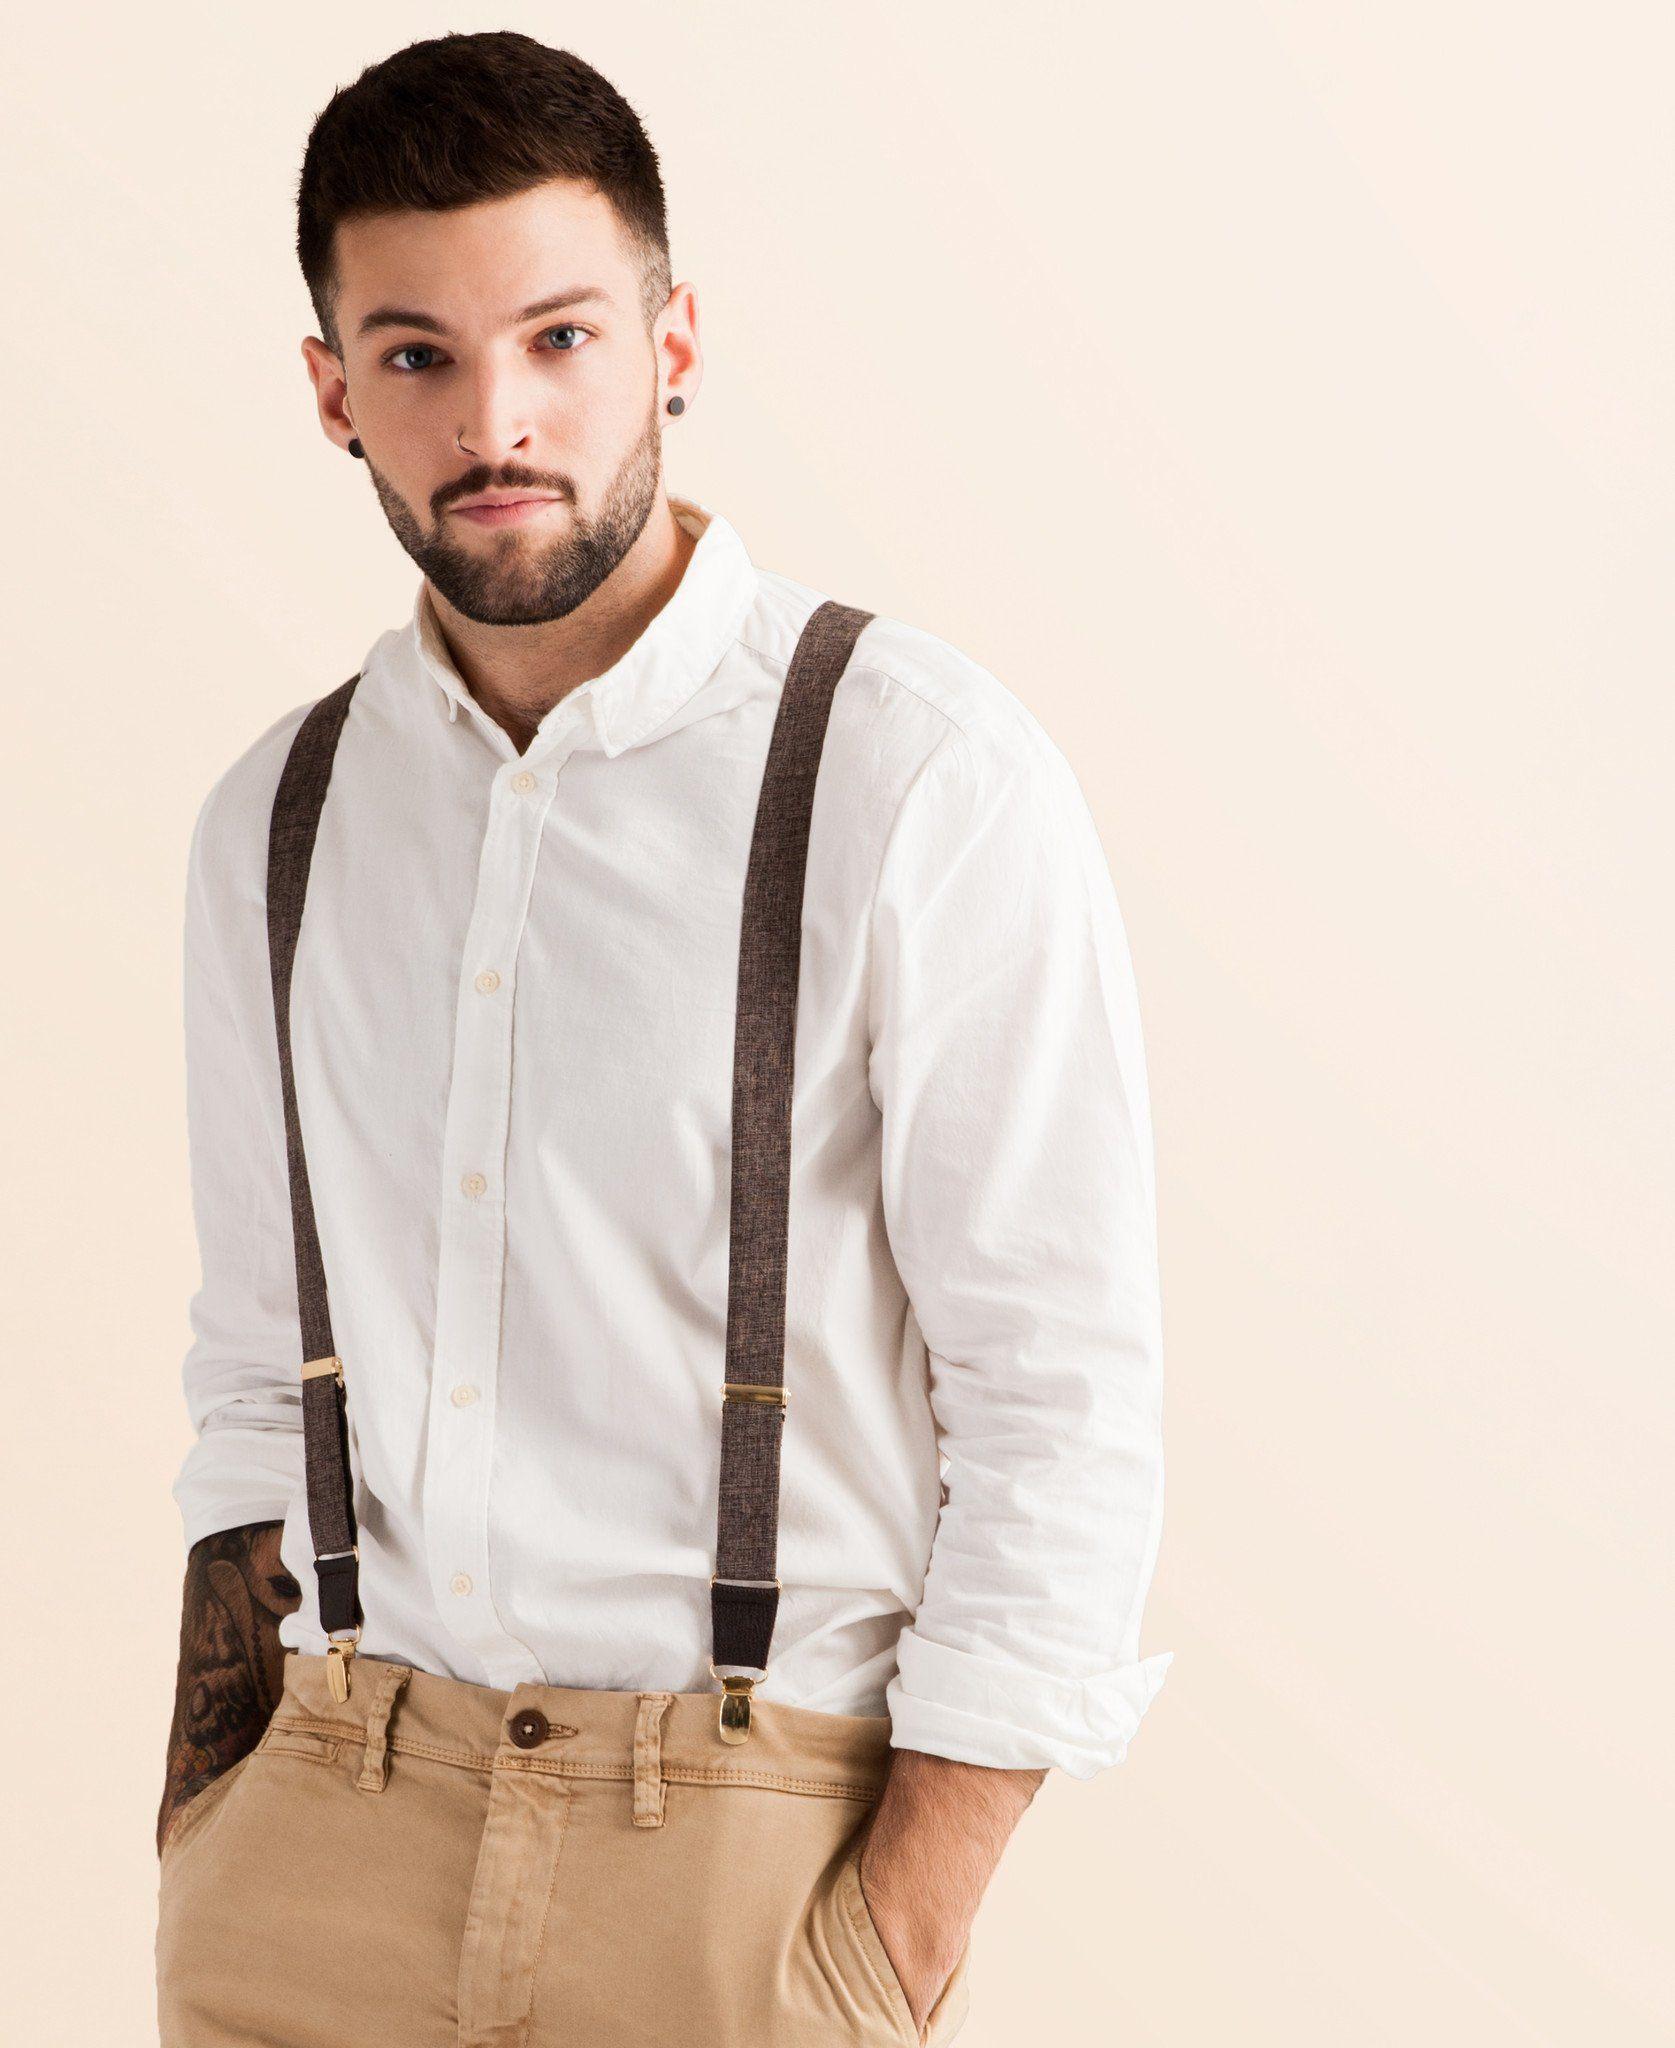 Brown Suspenders With White Dots for Men, Tan Brown Button